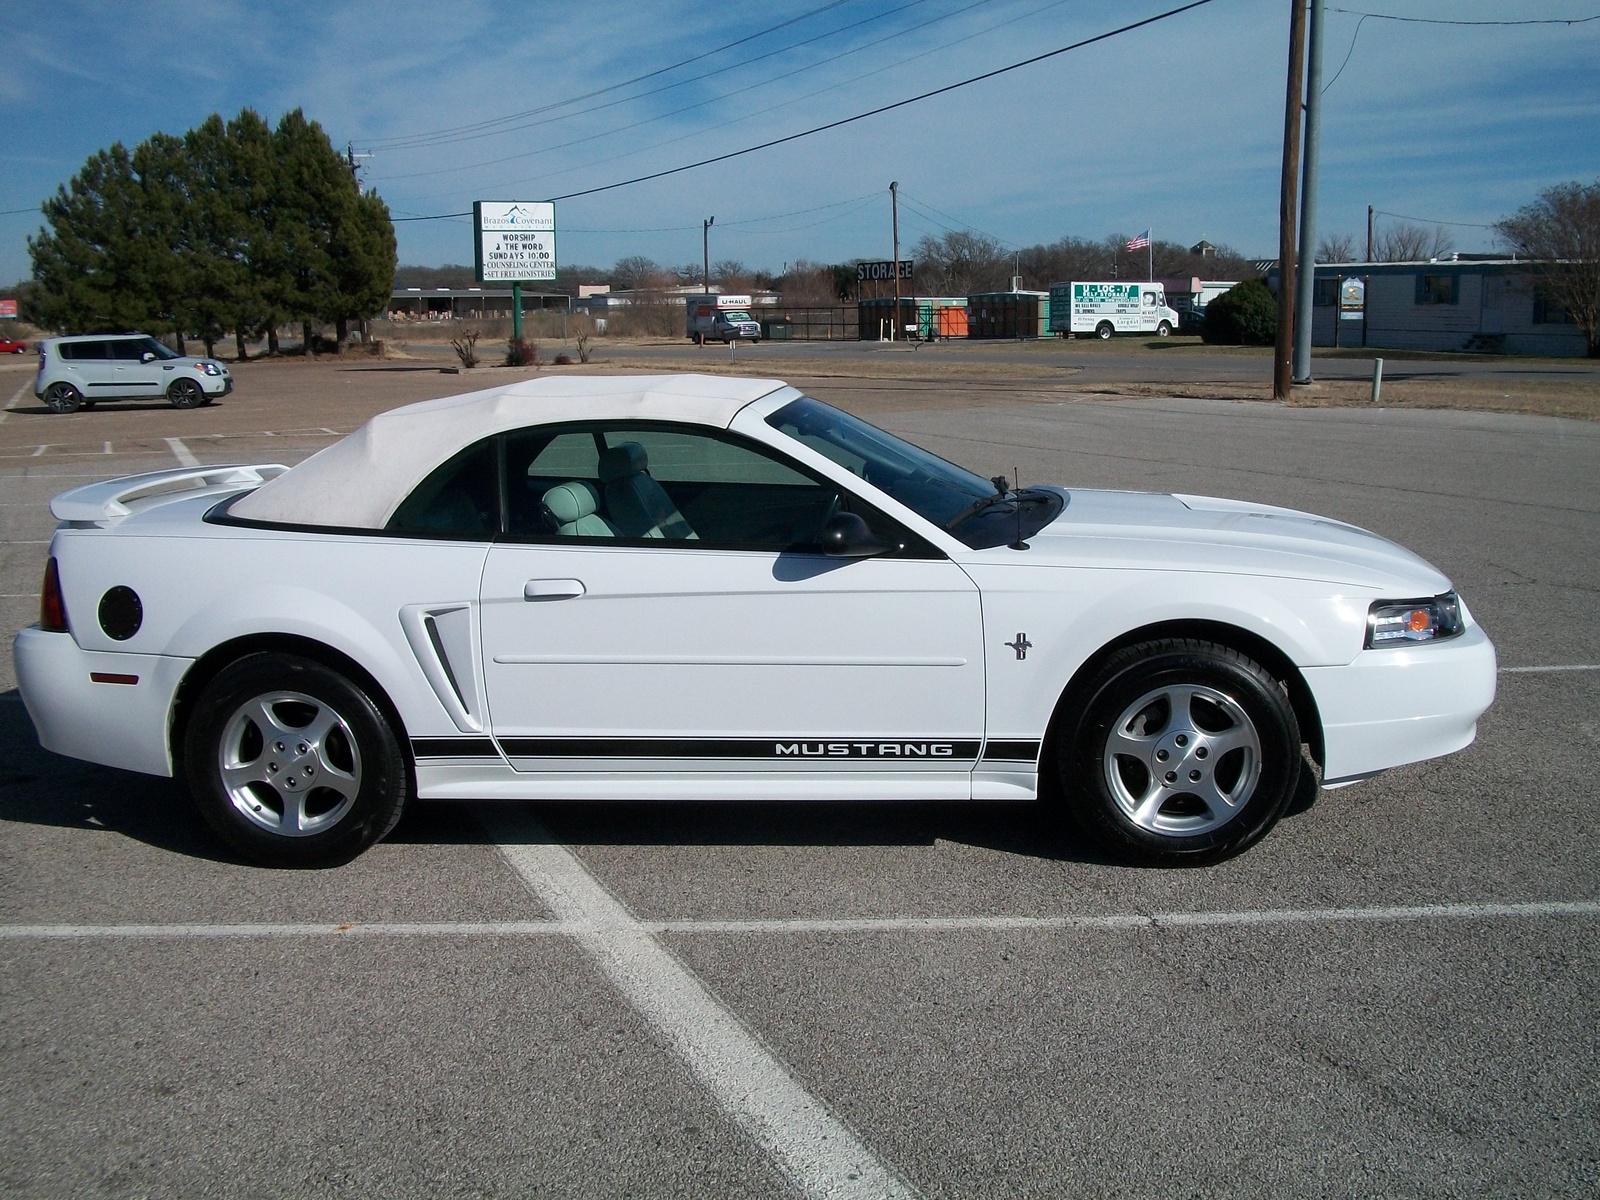 2002 Ford mustang deluxe reviews #5